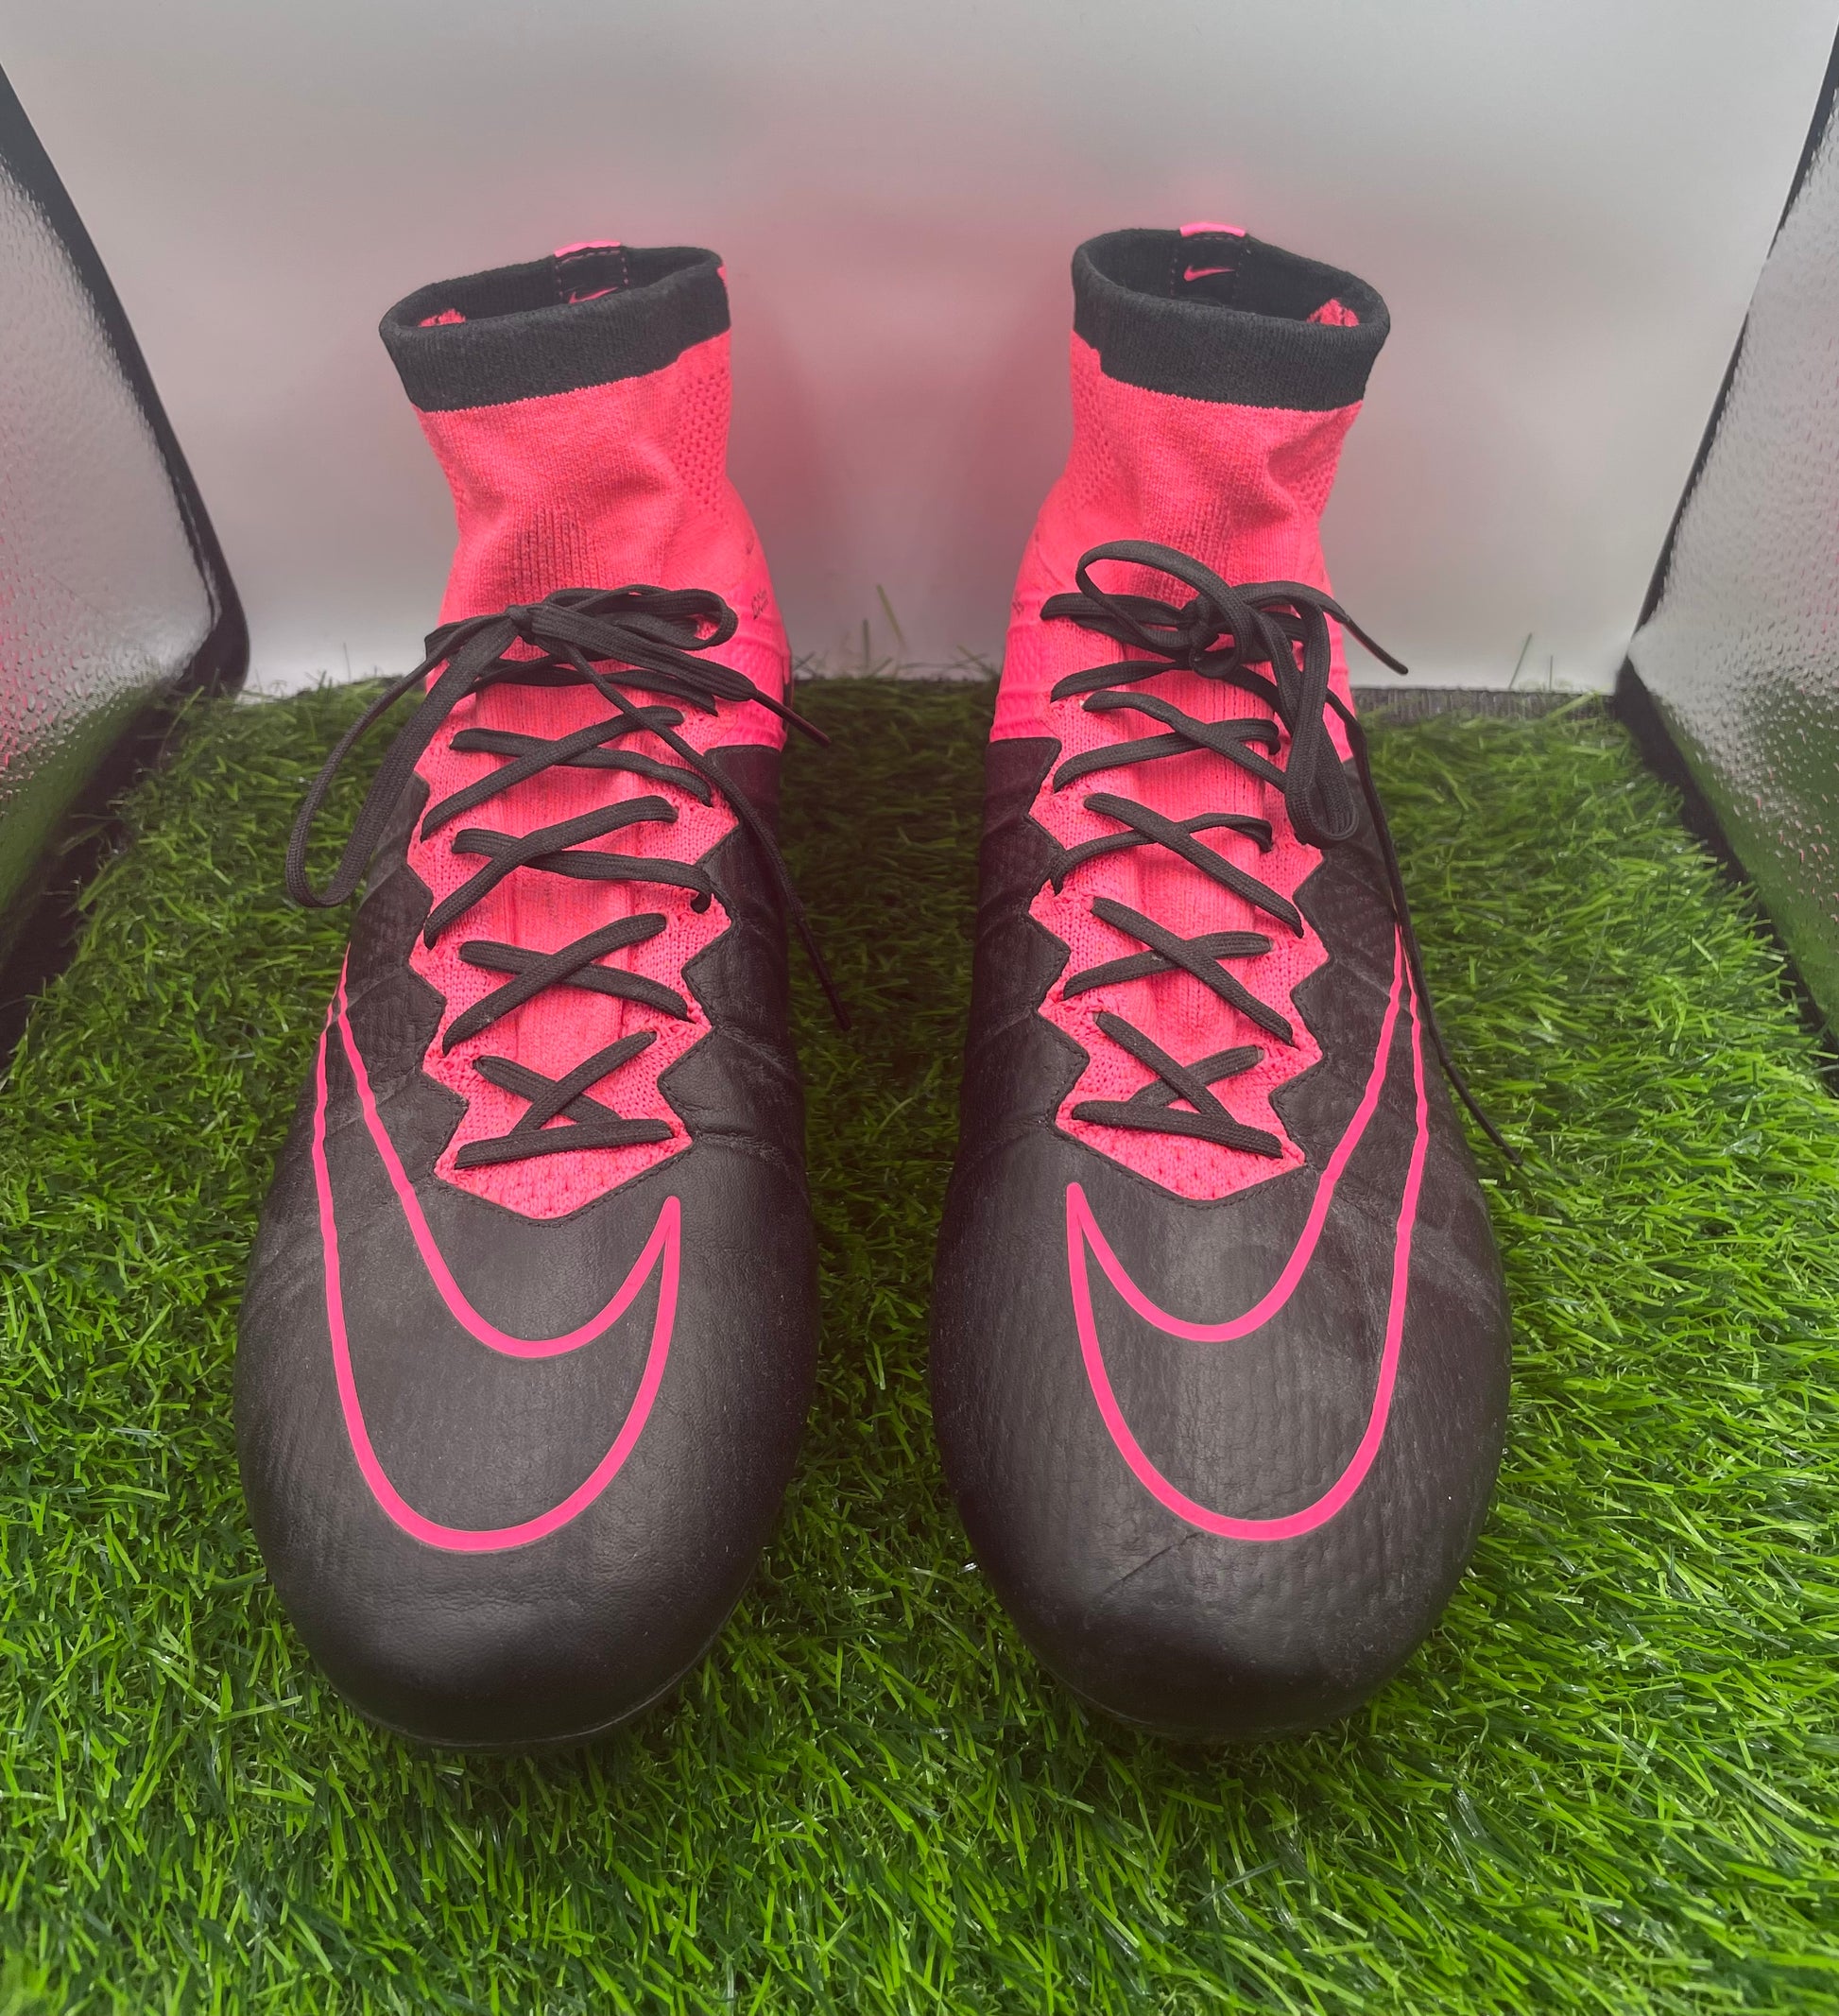 Nike superfly 3 pink/black SG – boots